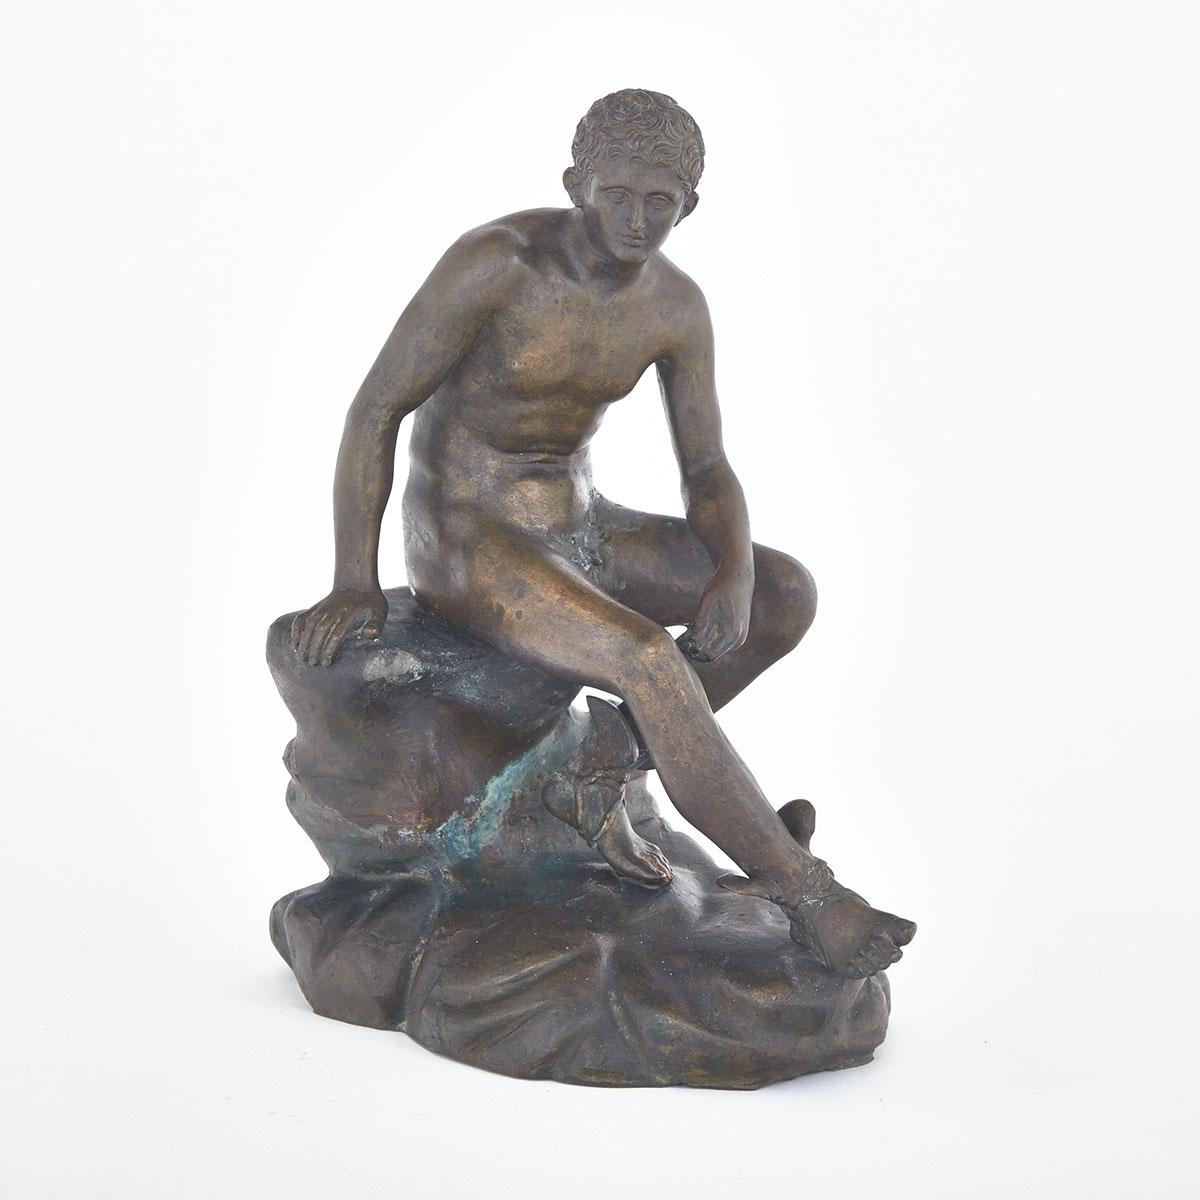 Italian ‘Grand Tour’ Patinated Bronze Model of Seated Hermes, After the Antique, mid 19th century